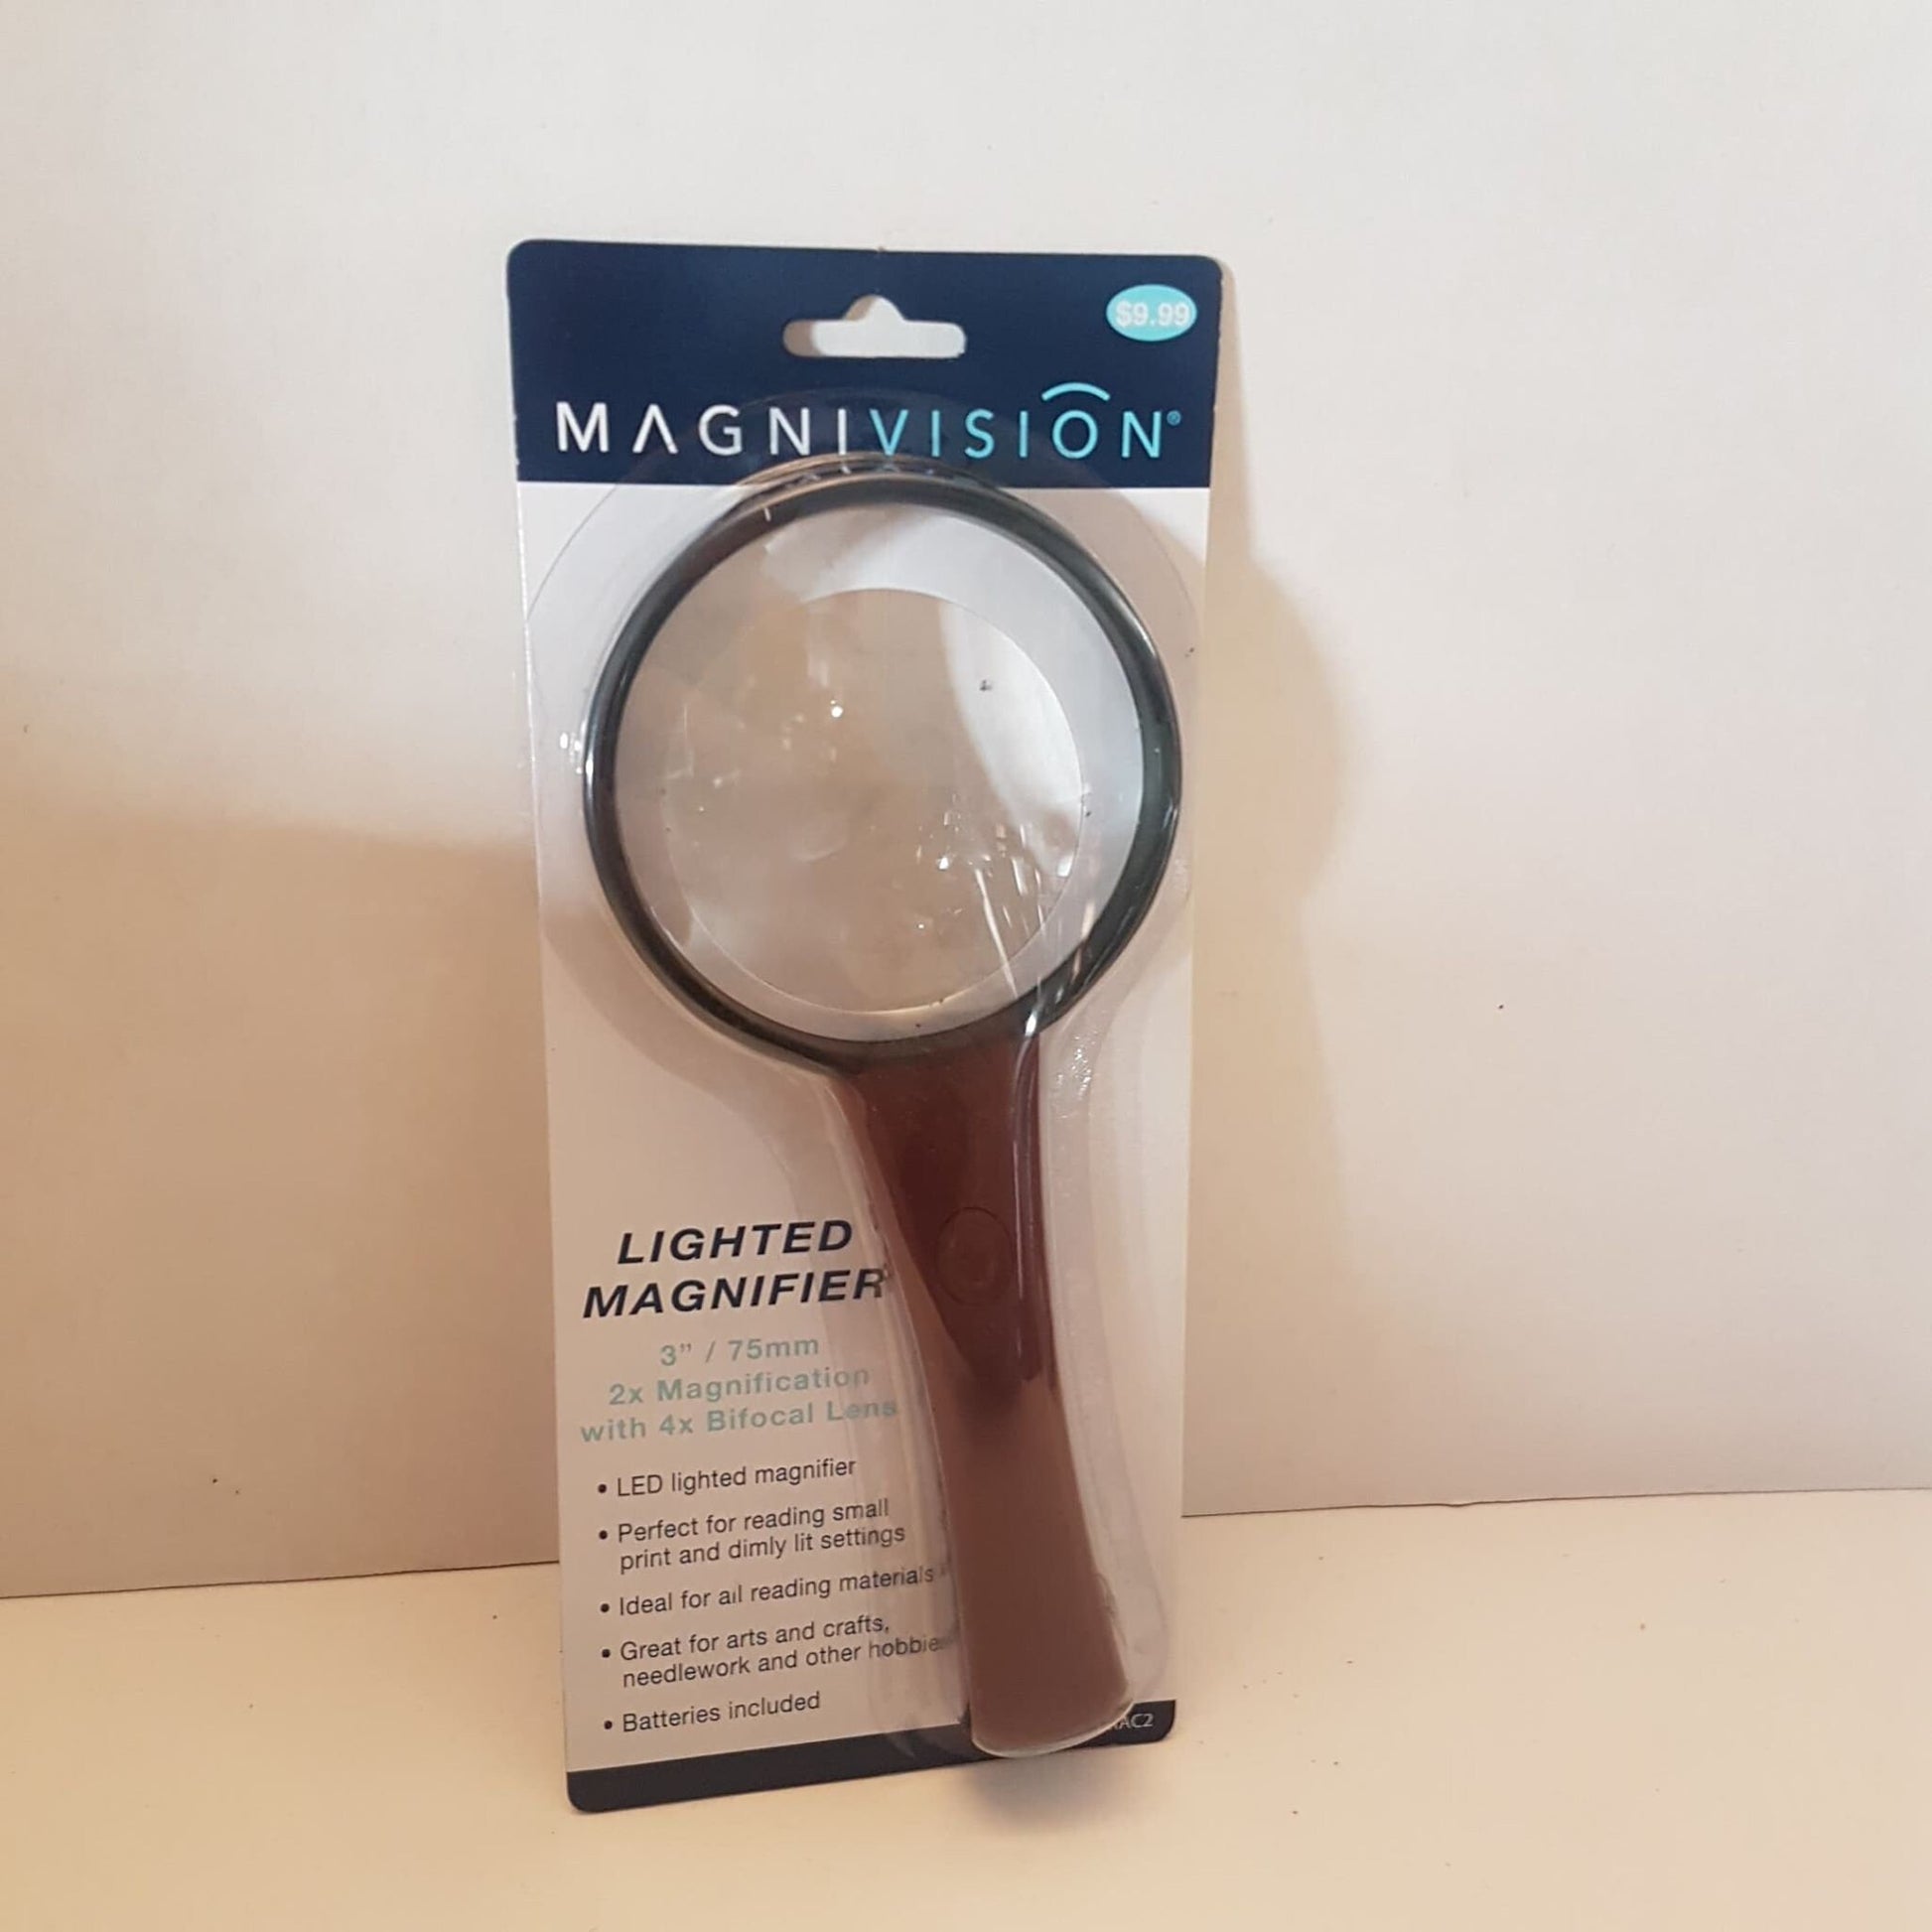 lighted magnifying glass 2x with 4 x bifocal lens